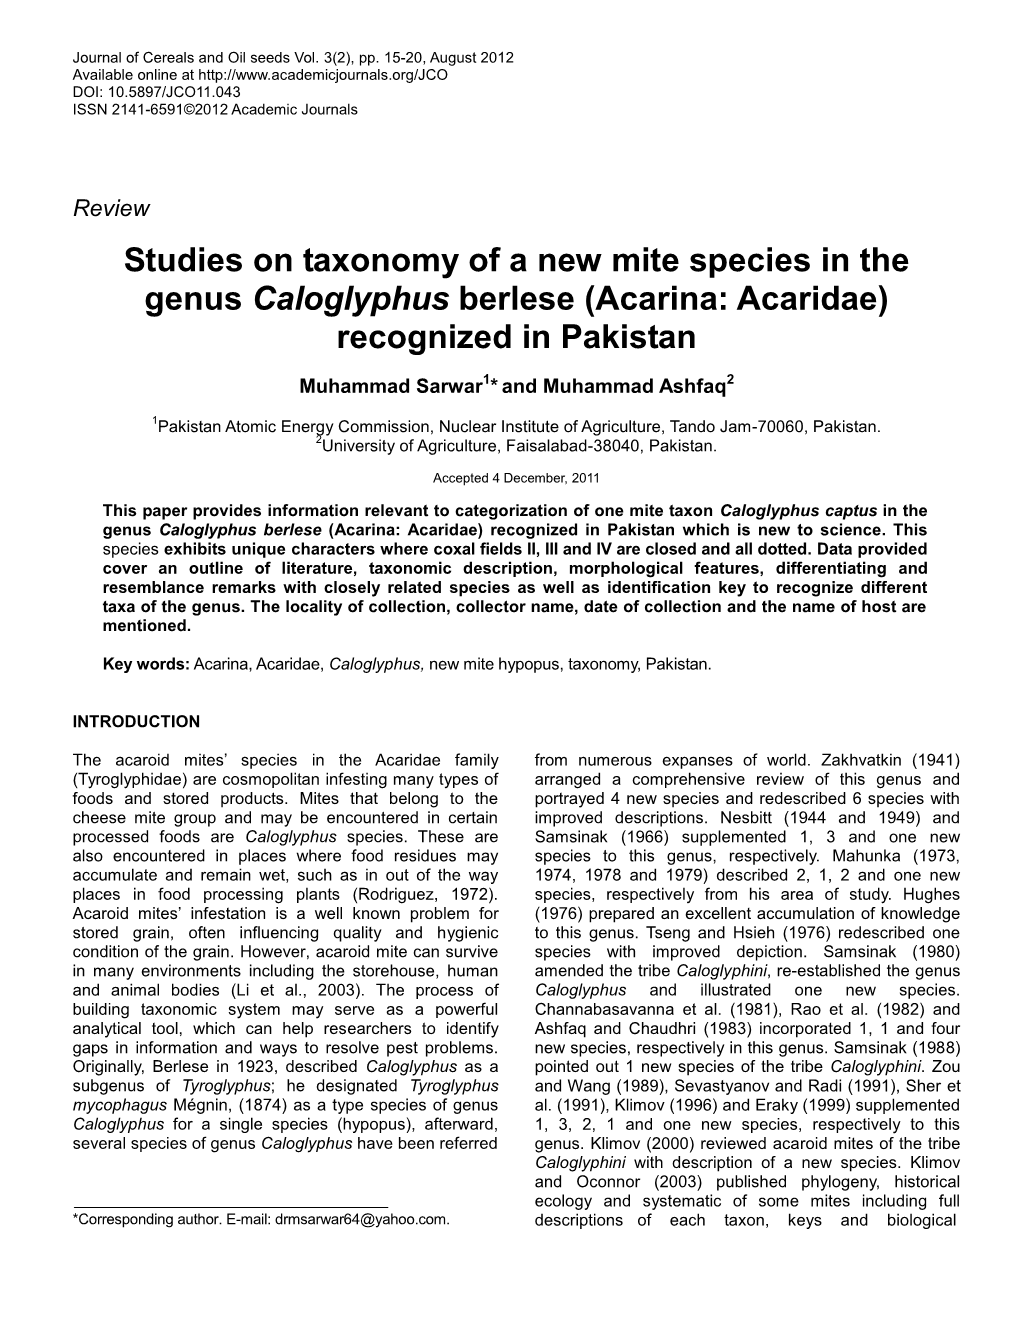 Studies on Taxonomy of a New Mite Species in the Genus Caloglyphus Berlese (Acarina: Acaridae) Recognized in Pakistan